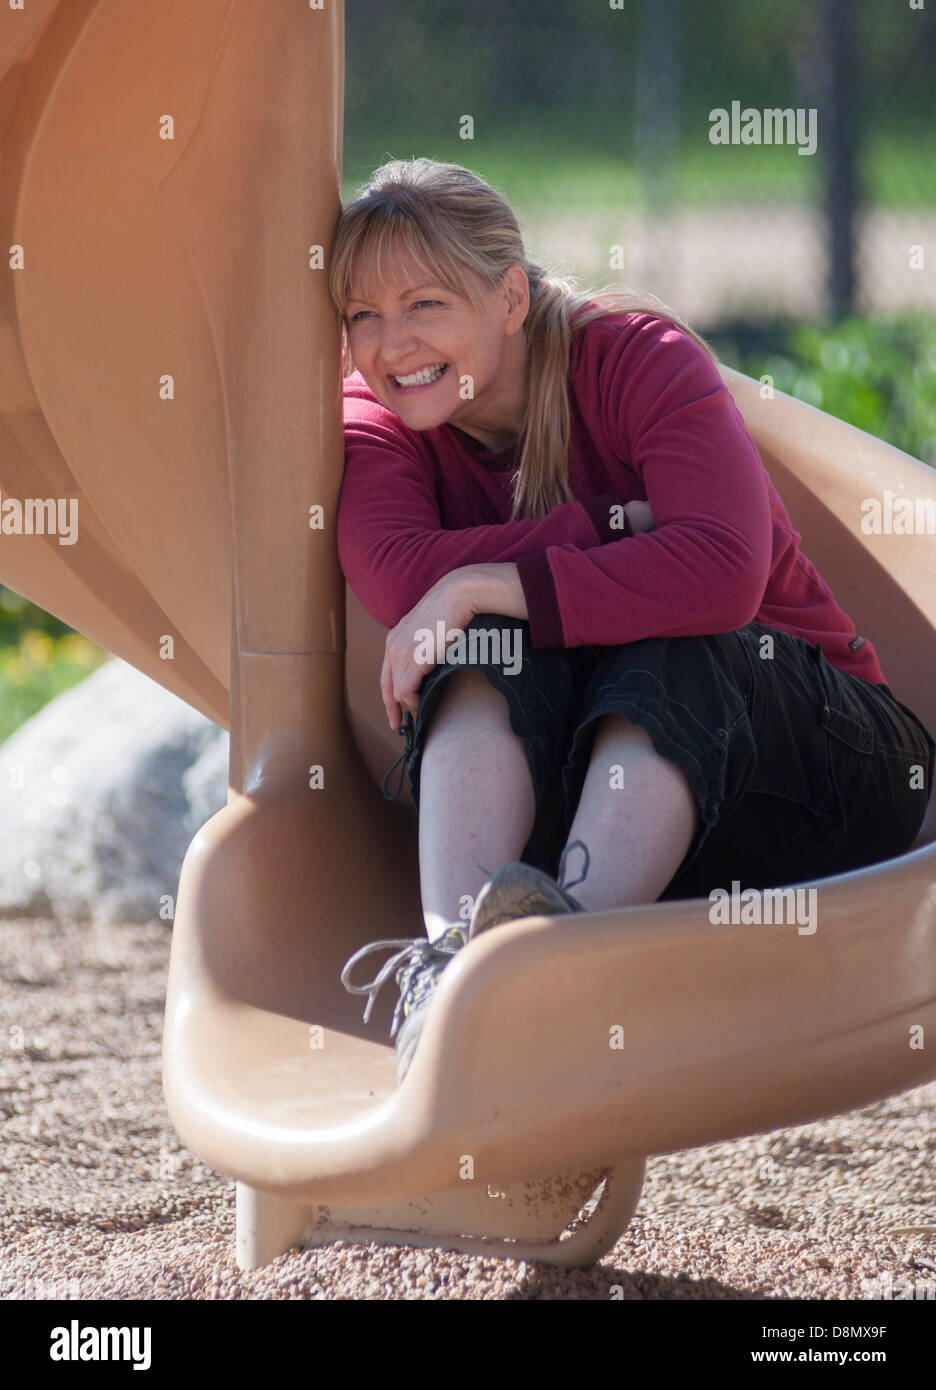 Woman with big grin sitting on outdoor slide. Stock Photo